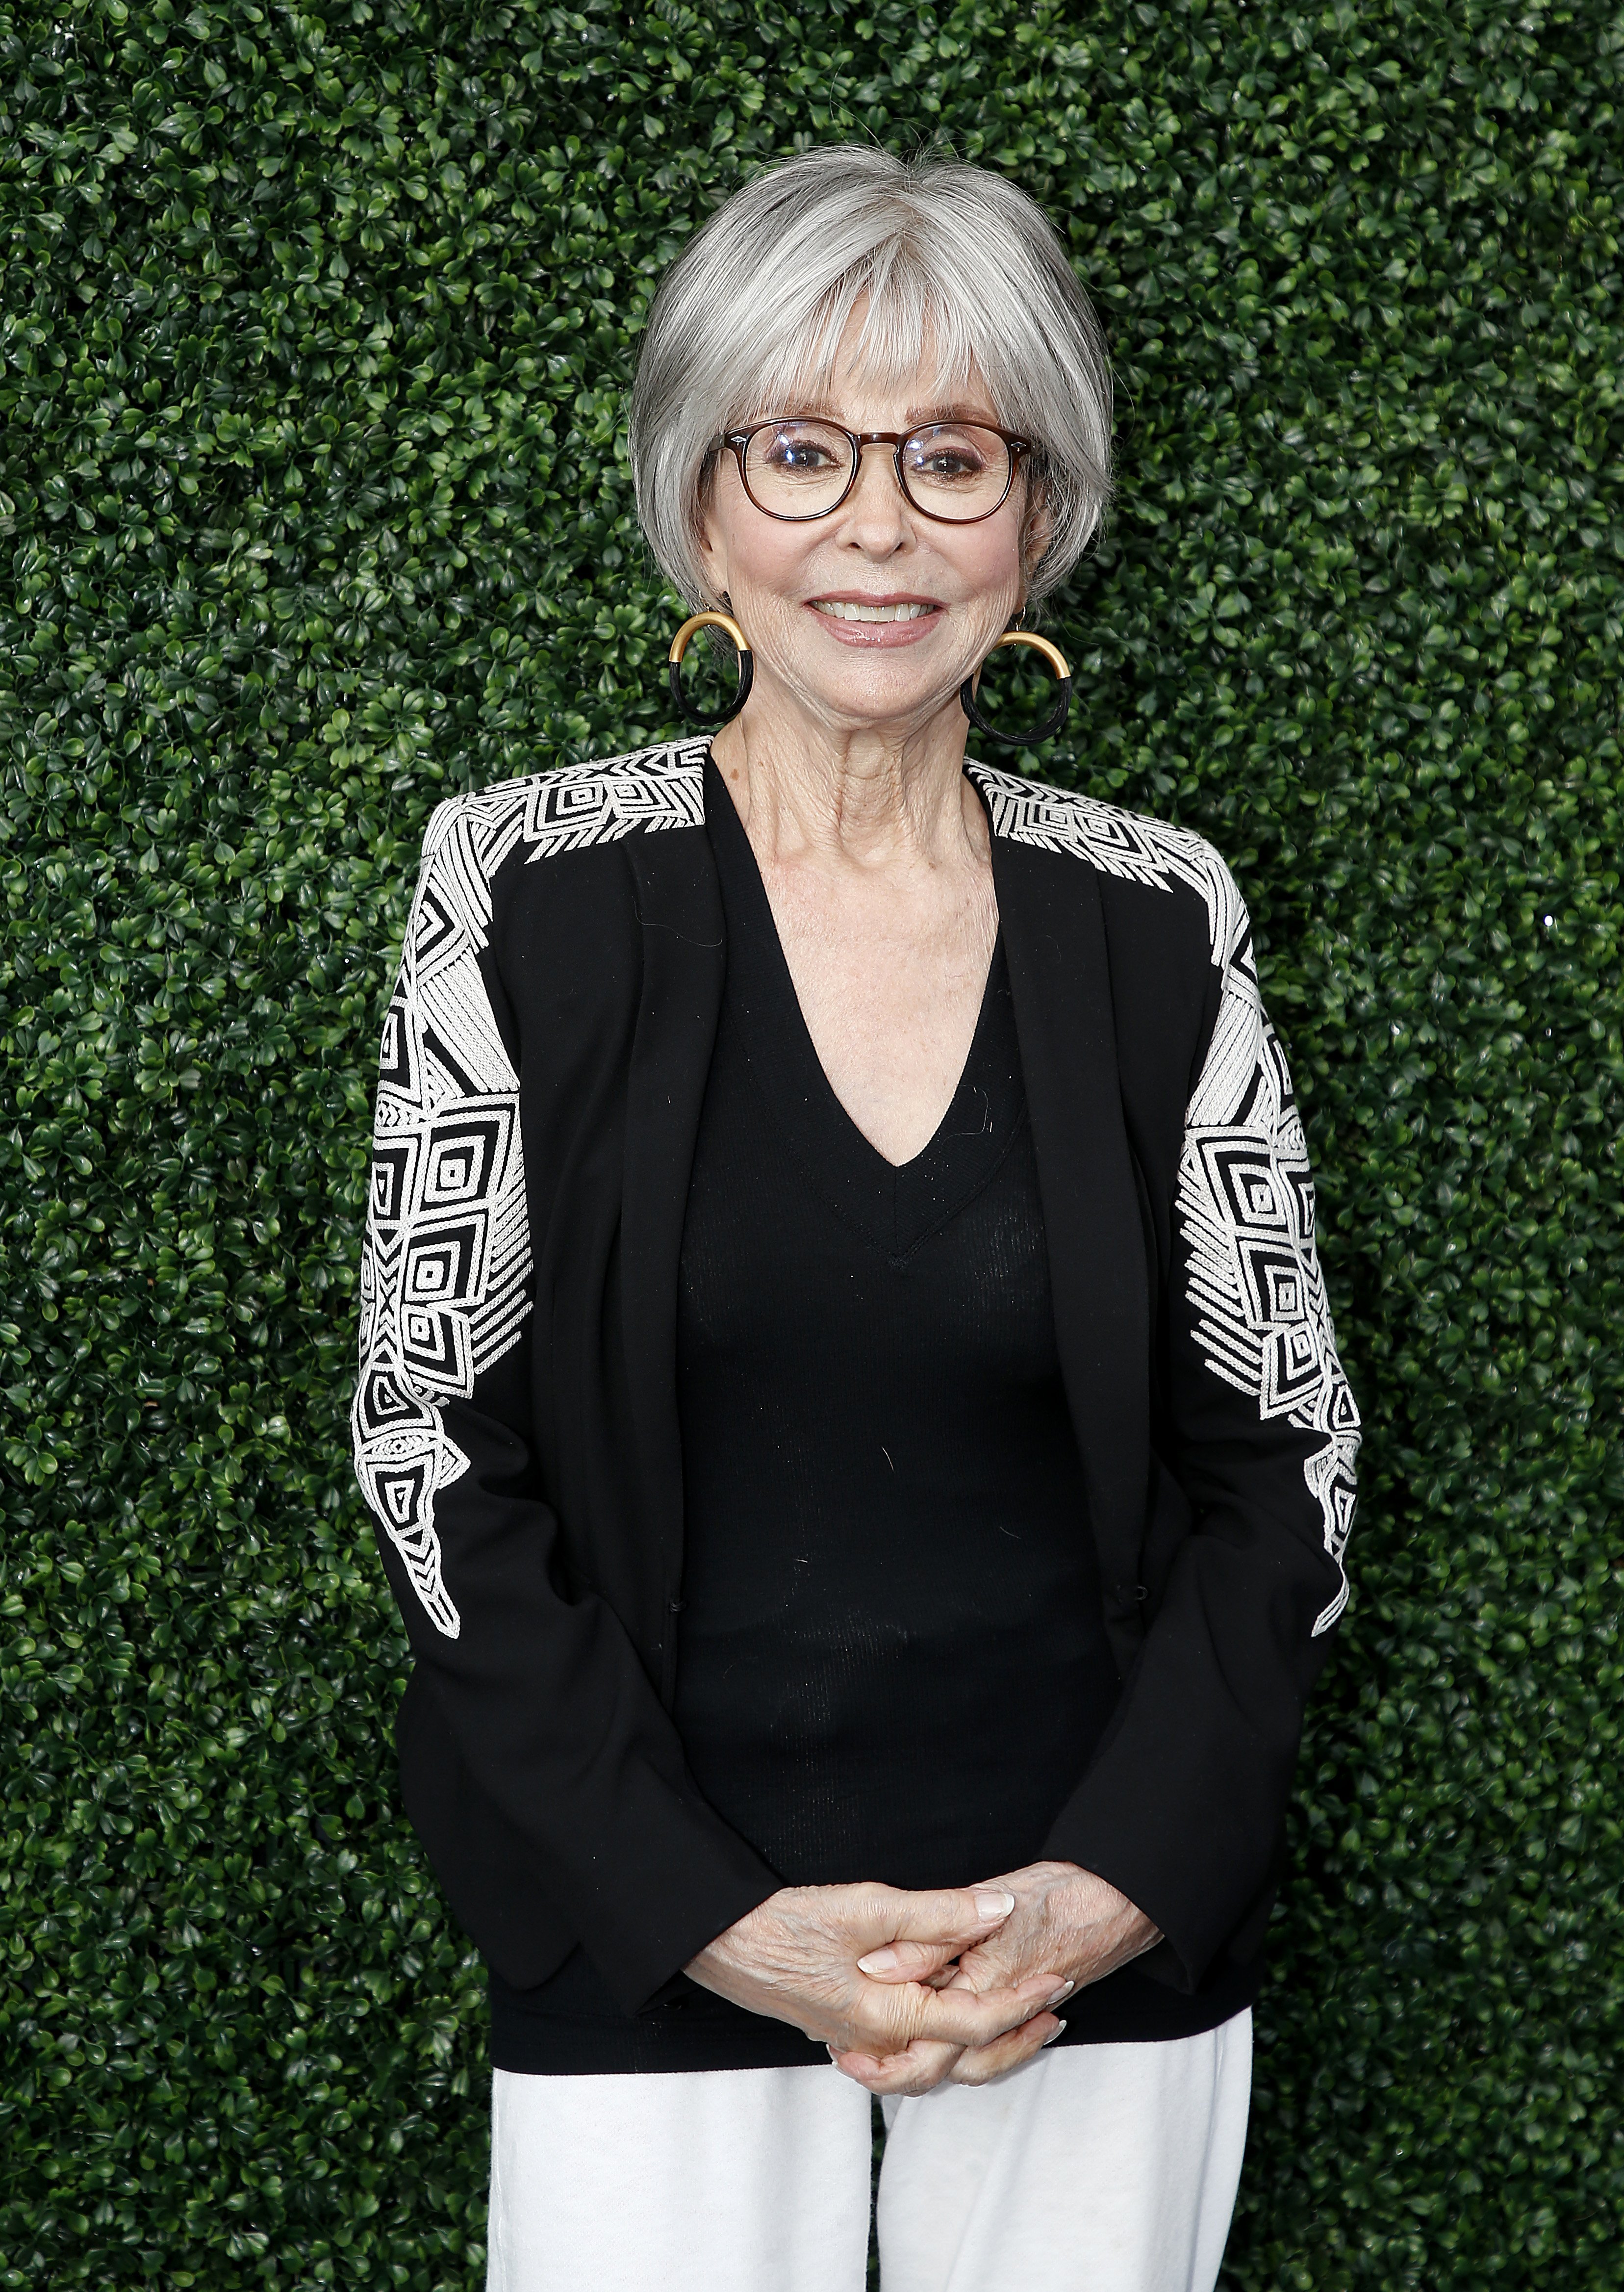 Rita Moreno attends USTA 19th Annual Opening Night Gala Blue Carpet  on August 26, 2019. | Photo: GettyImages